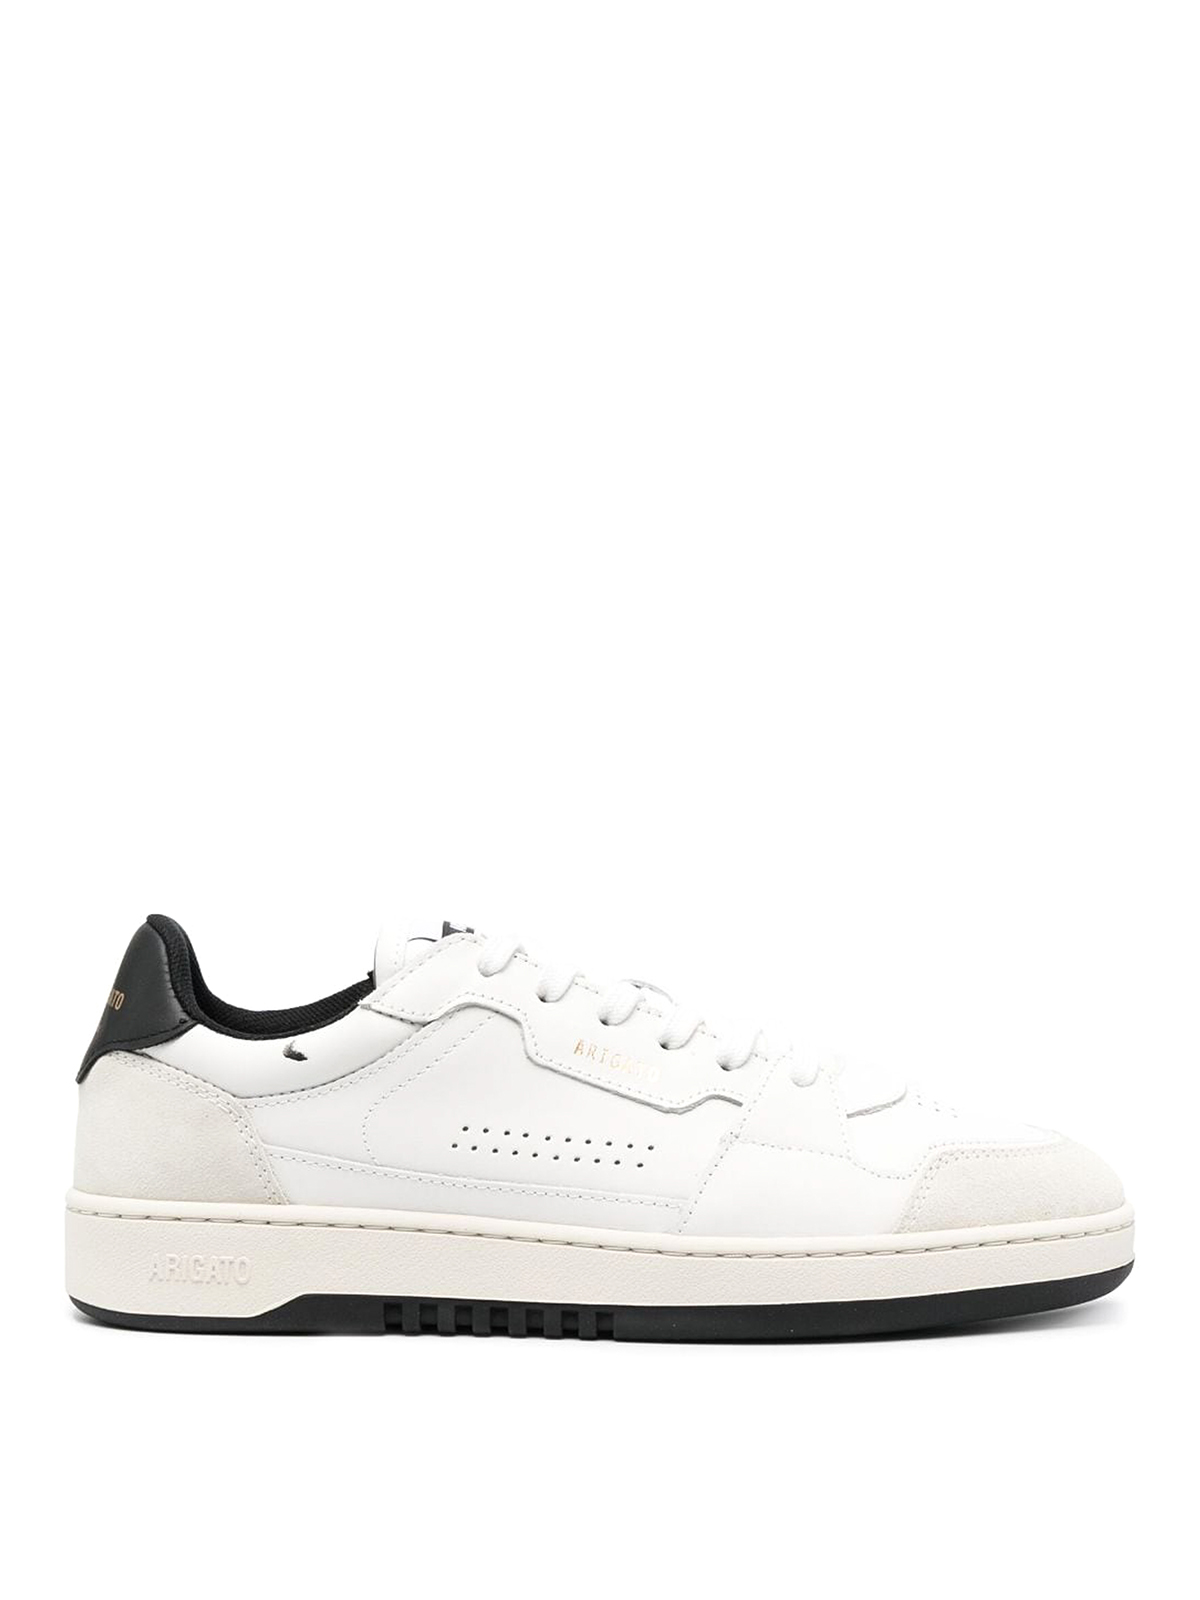 Axel Arigato Dice Leather Trainers In White